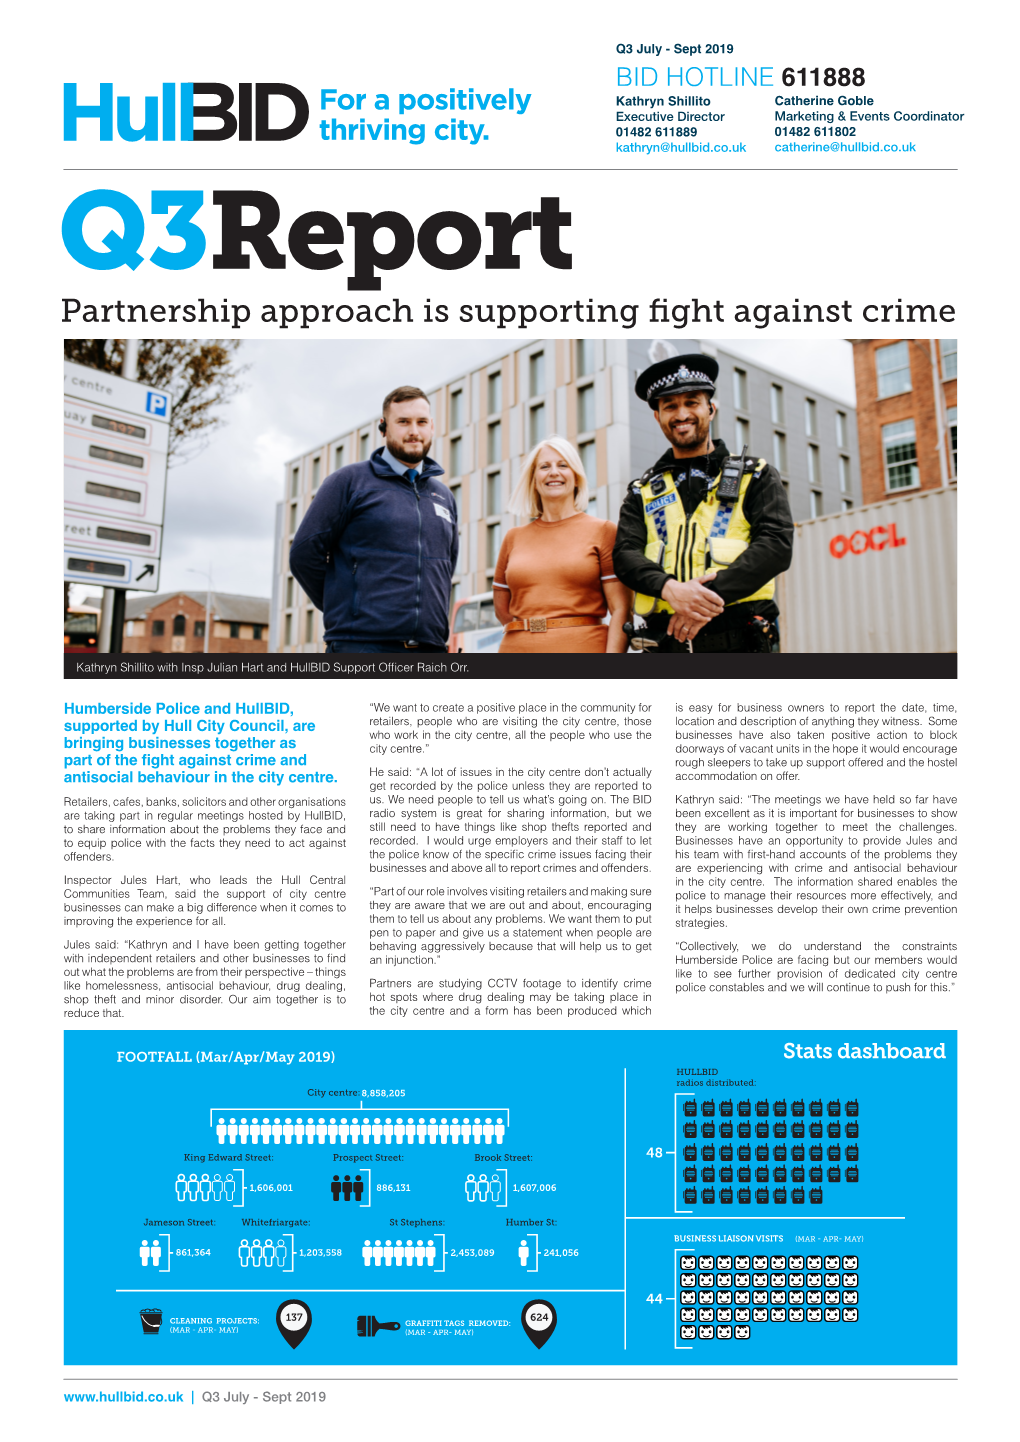 Q3report Partnership Approach Is Supporting Fight Against Crime